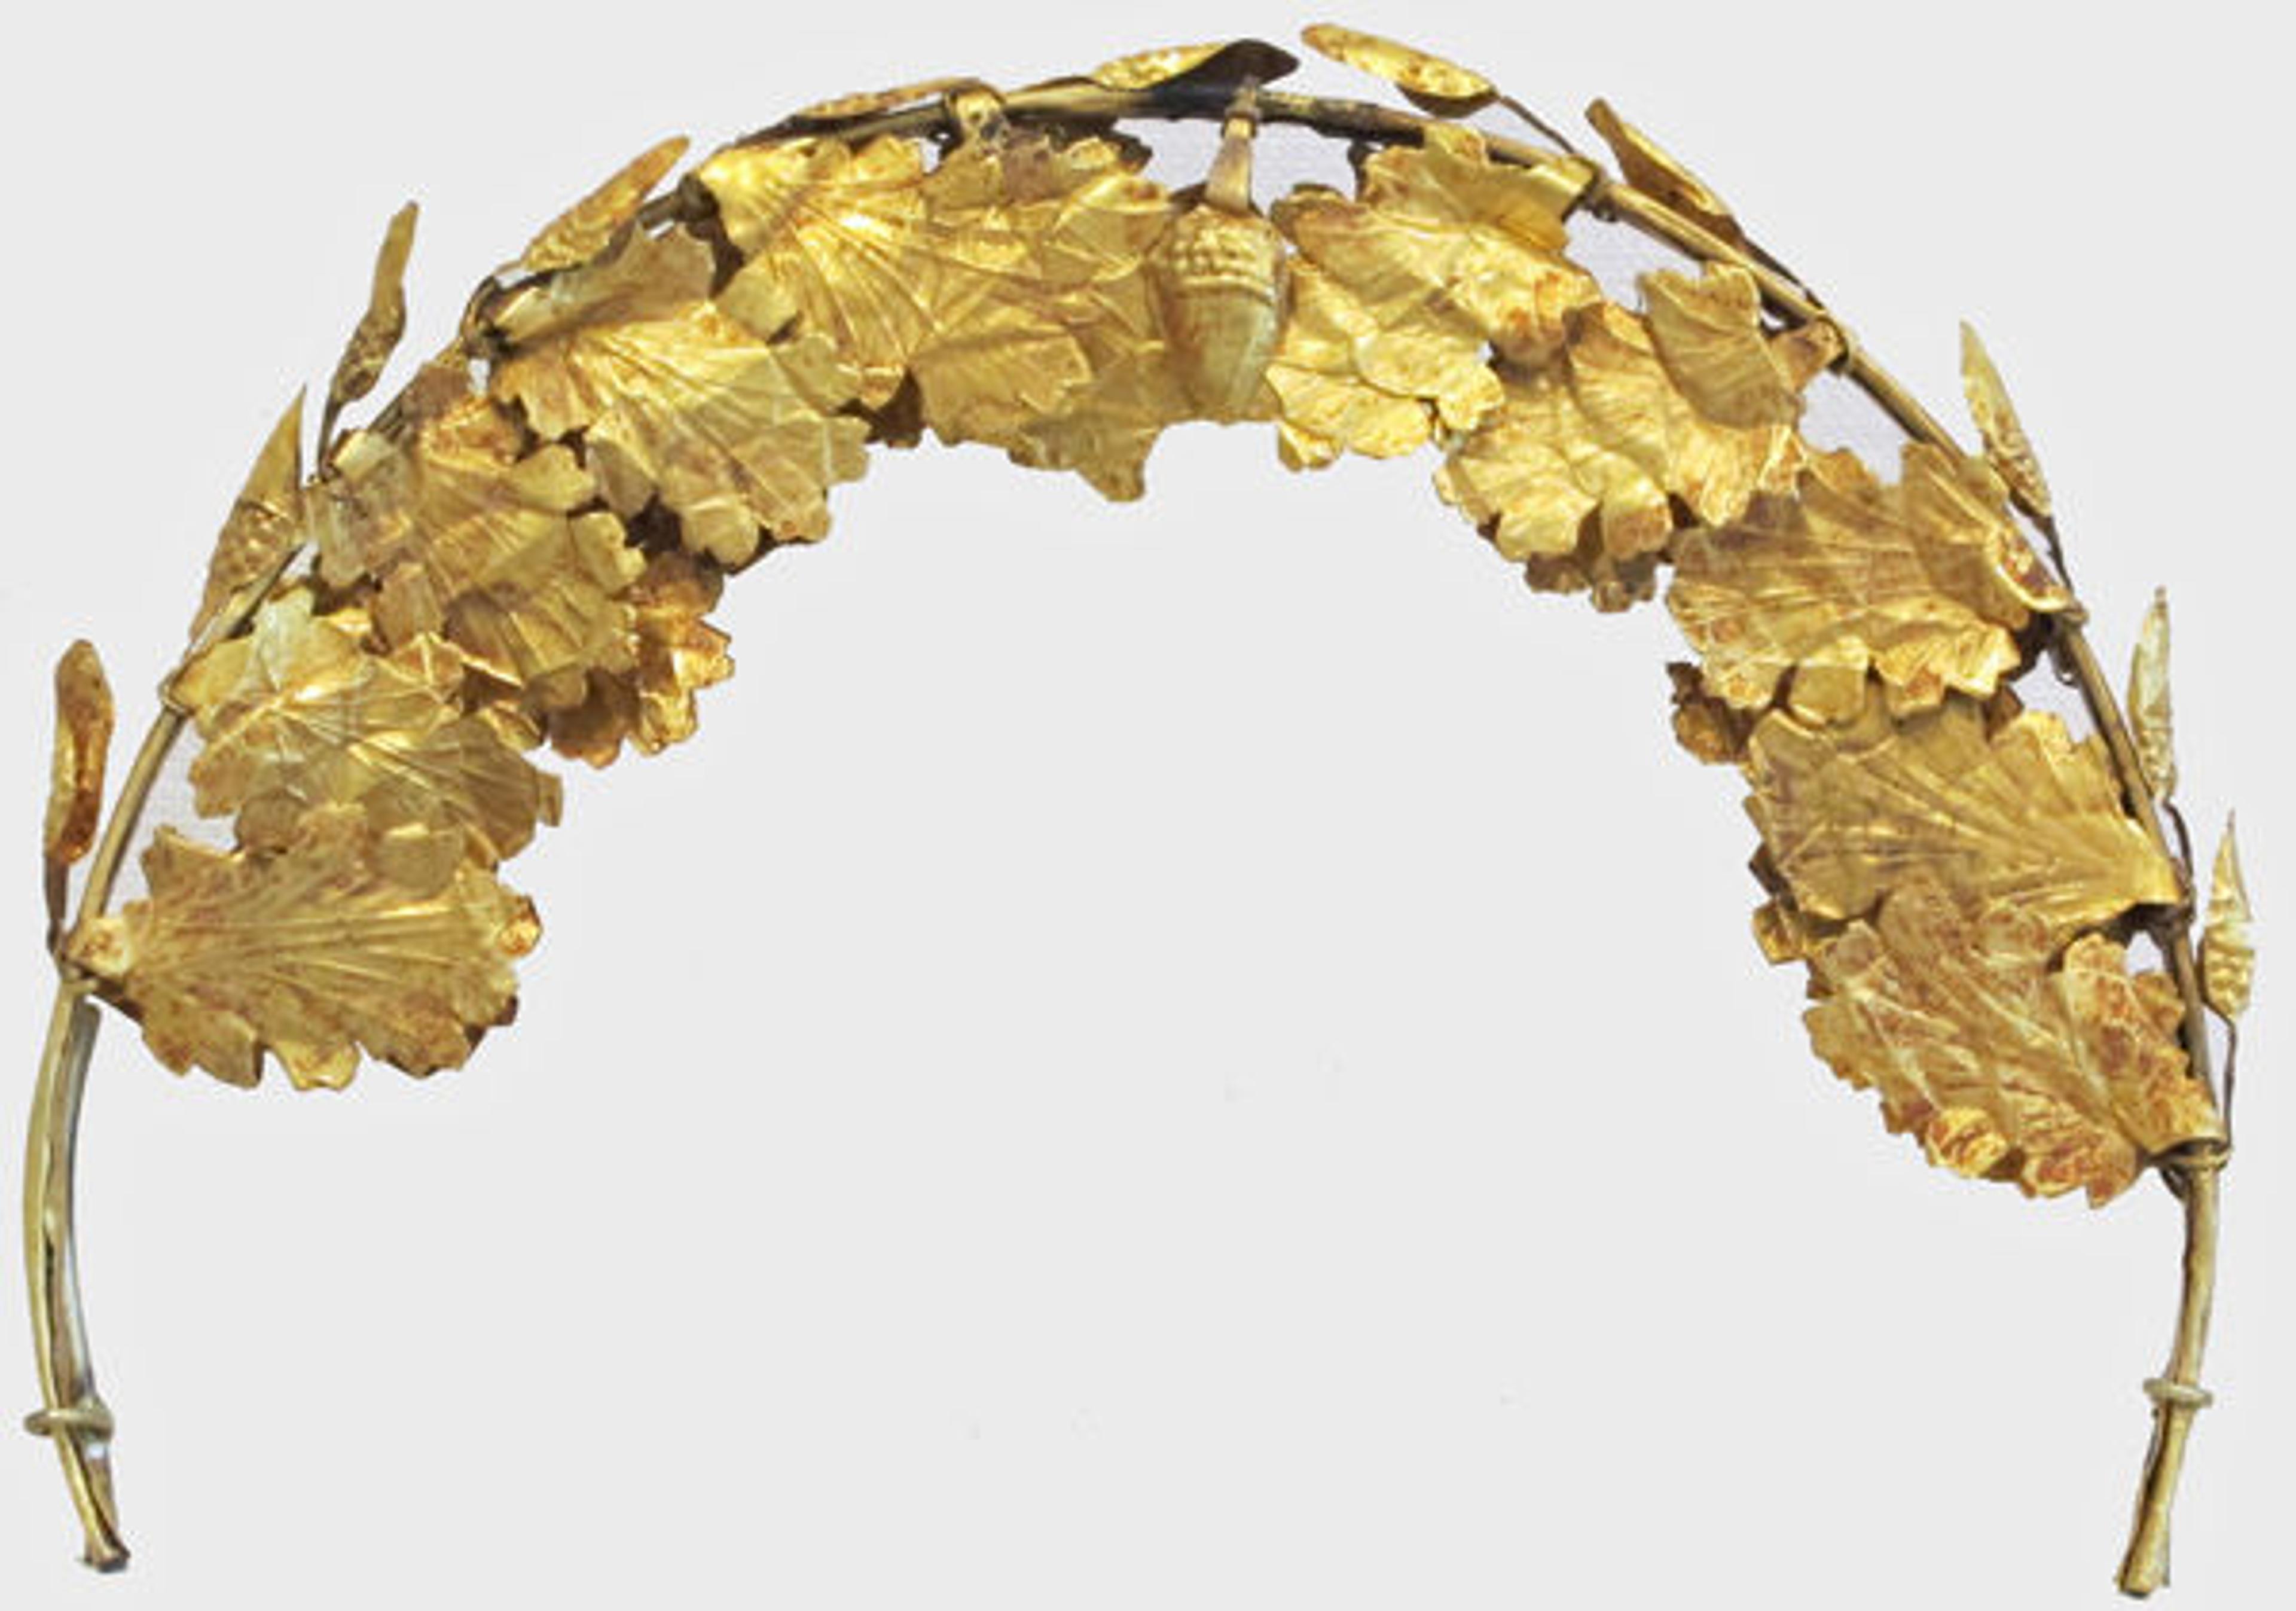 Gold funerary wreath, 1st–2nd century A.D. Imperial. Roman. Gold; Other: 12 1/2 in. (31.8 cm). The Metropolitan Museum of Art, New York, Gift of Mrs. Wallace Phillips, 1957 (57.59)